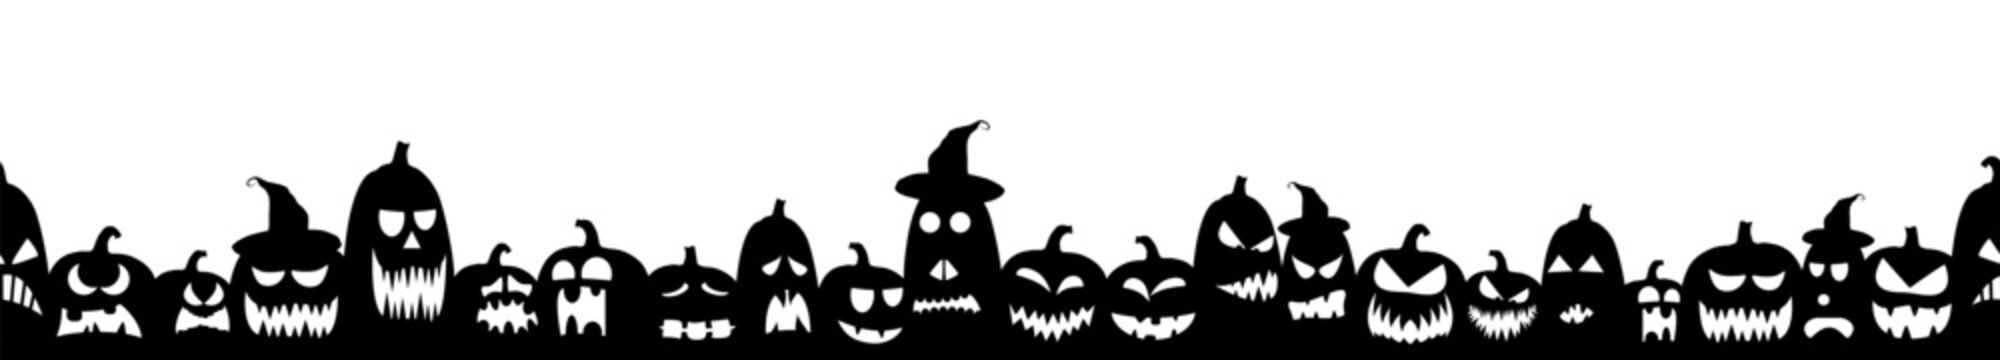 scarry seamless background with different pumpkins for halloween layouts